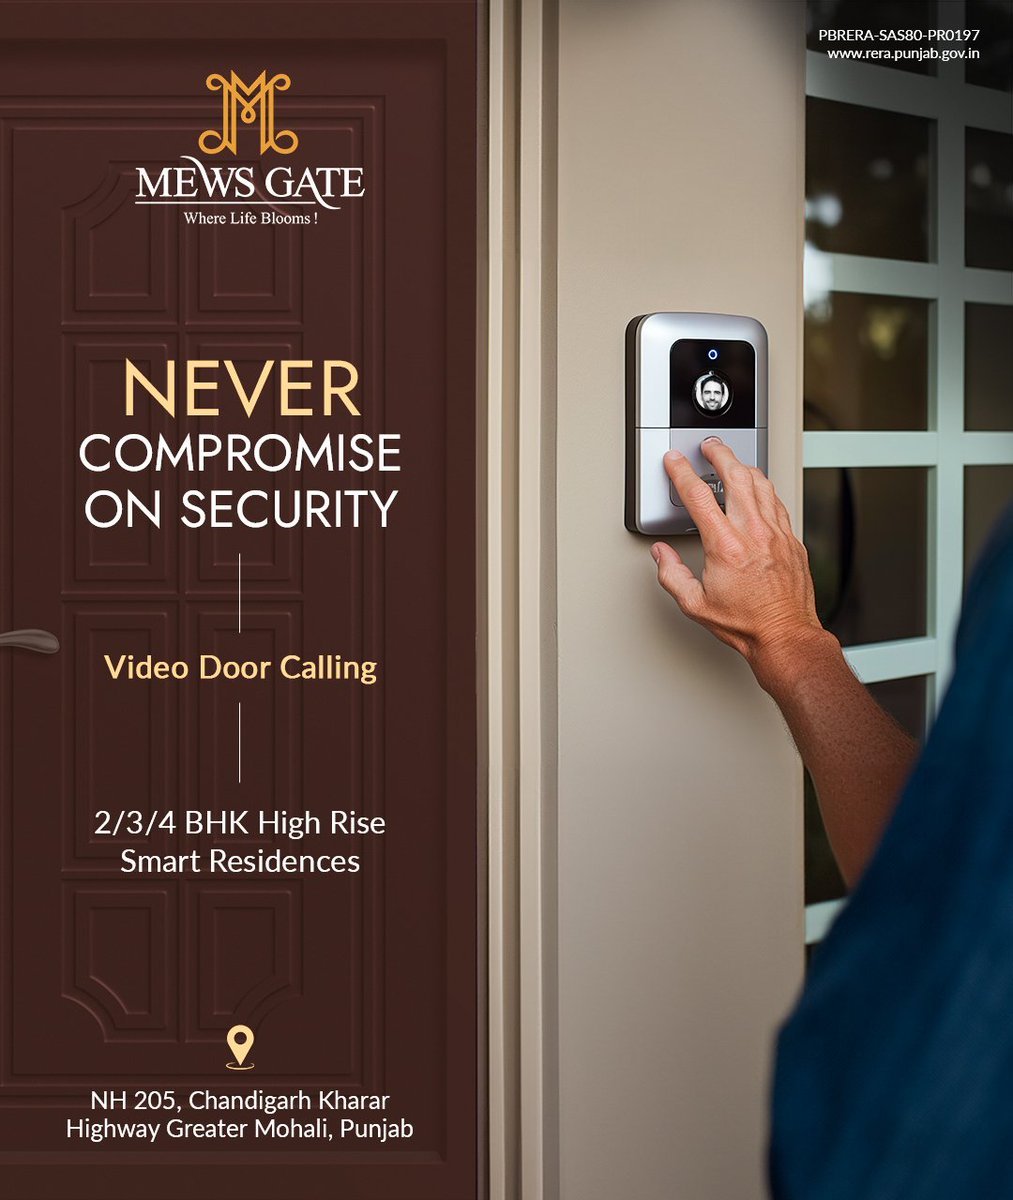 We have embraced technology to ensure your safety without compromising on comfort. 🏠2/3/4 Alexa-Operated Smart Residences at Mews Gate 📍NH 205, Chandigarh Kharar Highway Greater Mohali, Punjab ↘️Call us at 90695-90695 #MewsGate #Security #HighRiseLiving #SmartResidences